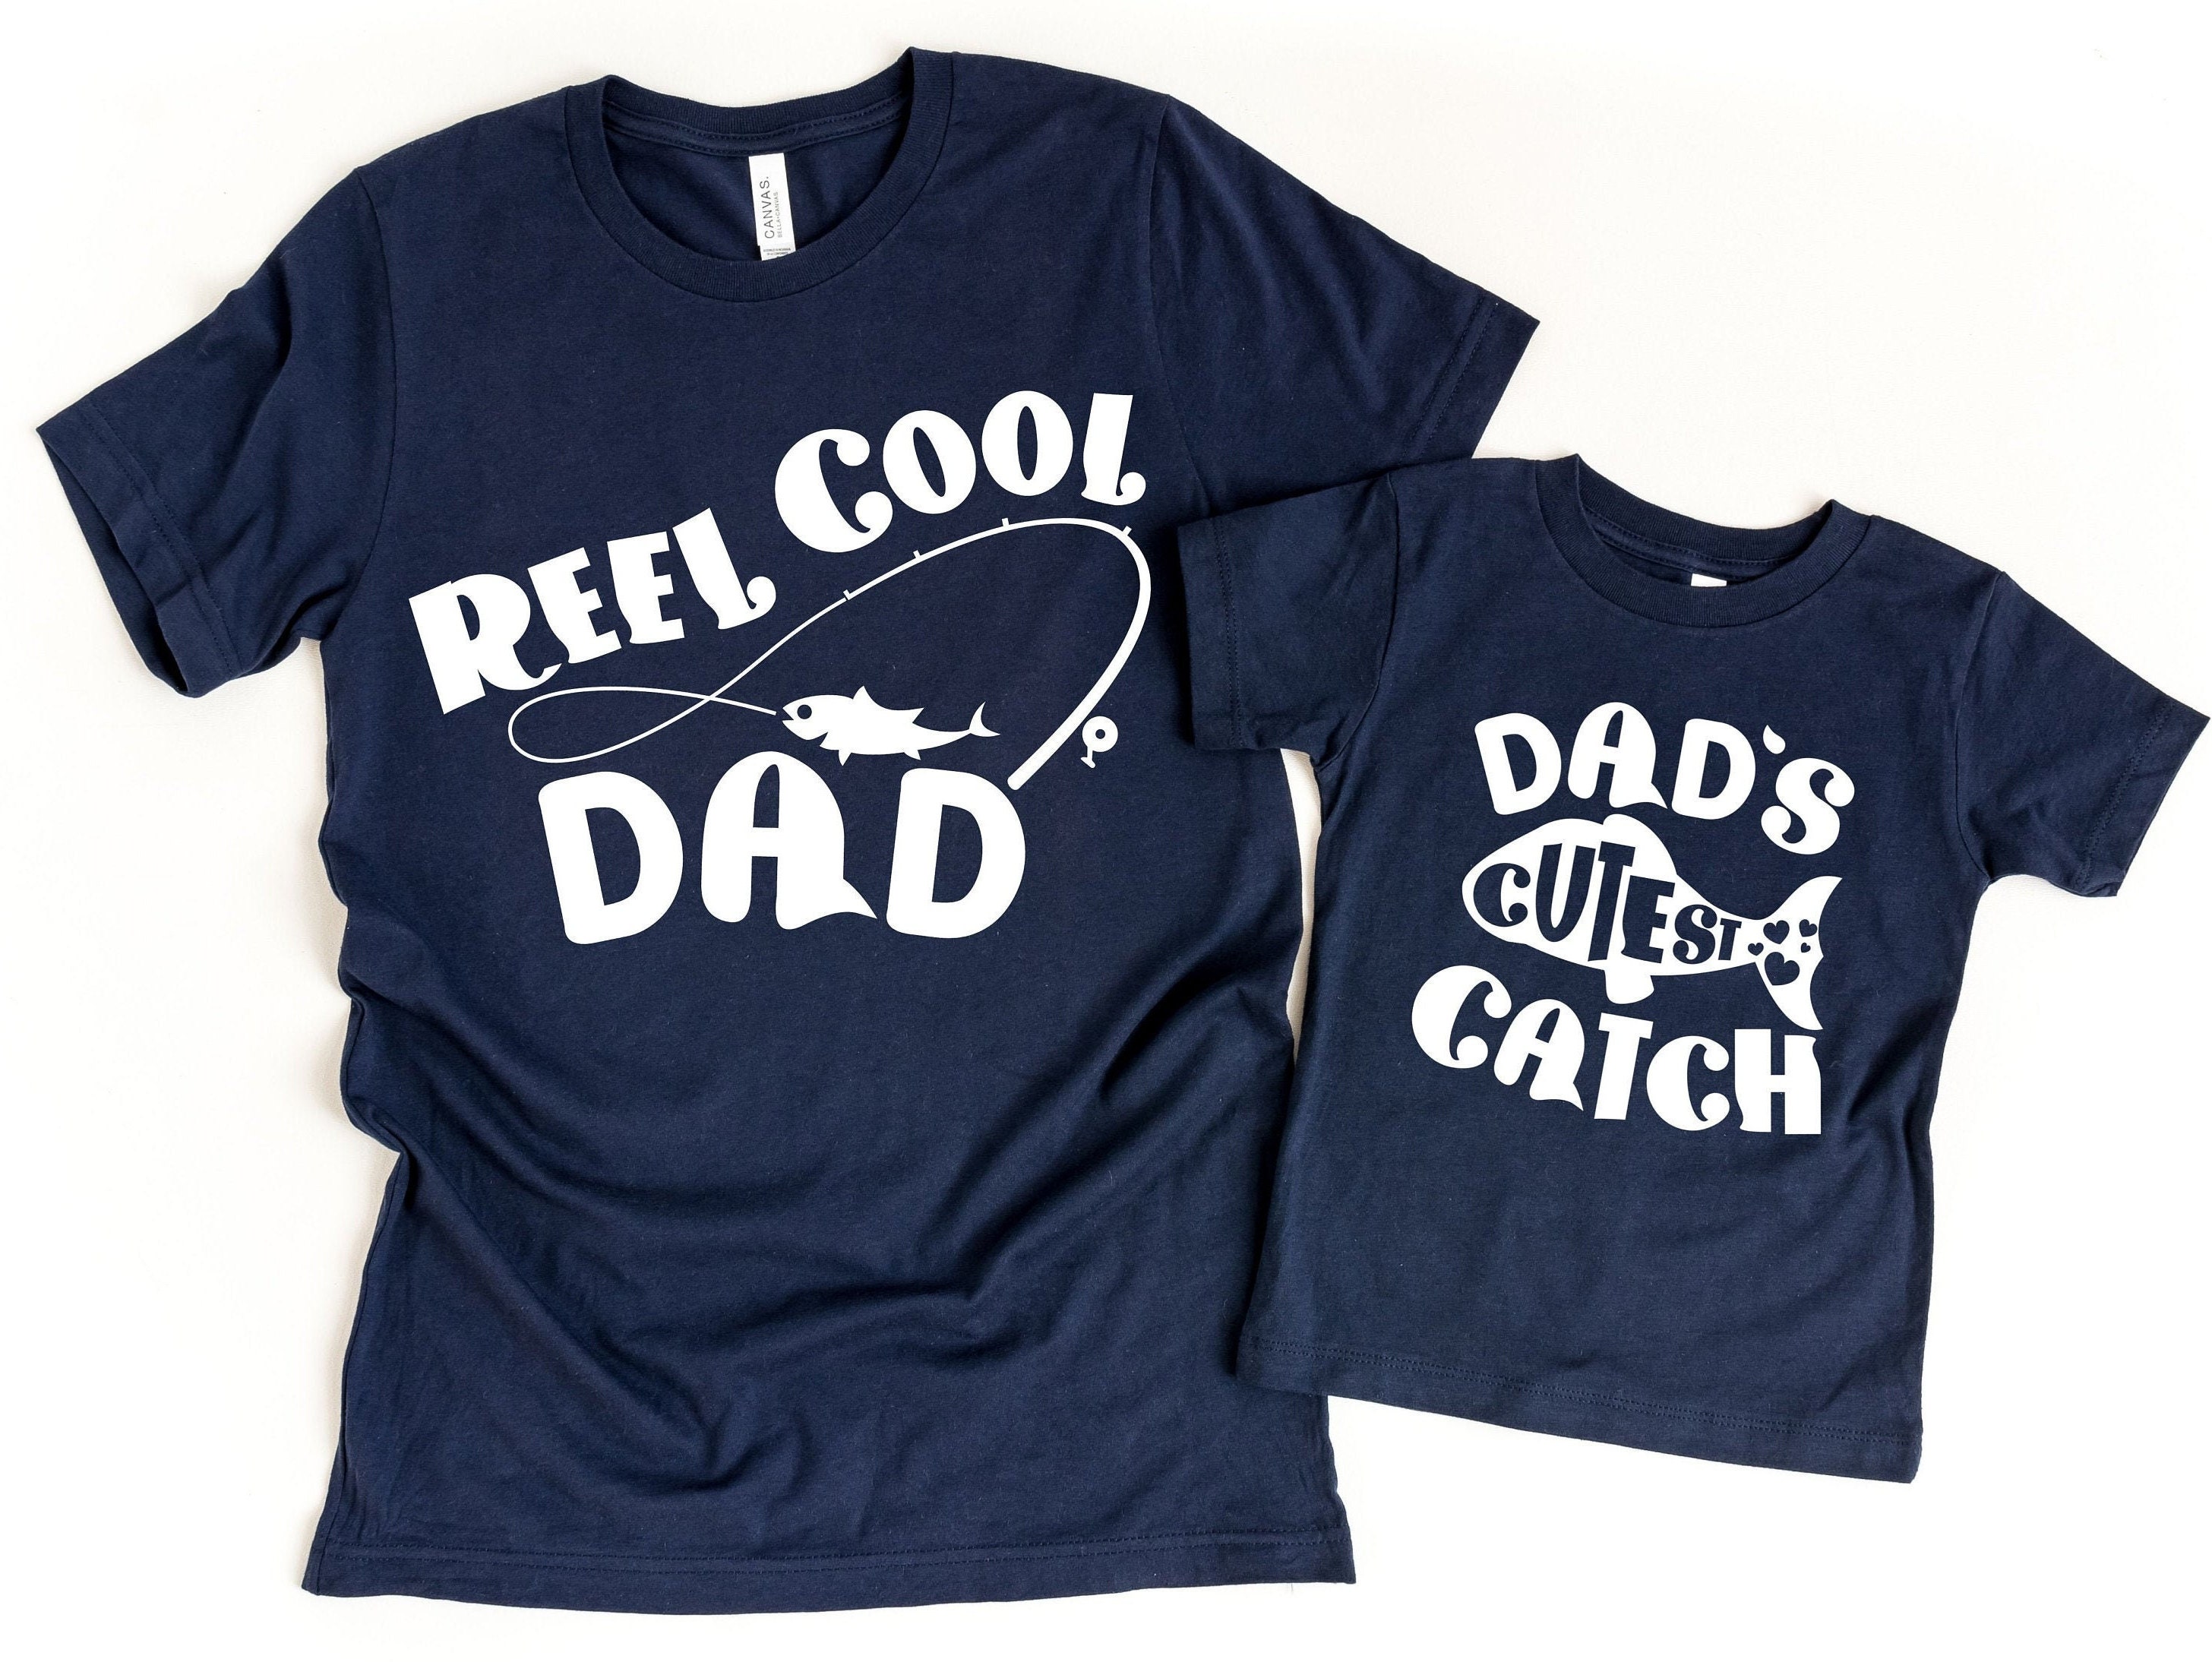 Dad Gift From Son Fishing, Father Son Matching Shirts, Daddy and Me Outfits  Fathers Day Gift From Son Birthday Gift for Dad Reel Cool Dad -  Canada